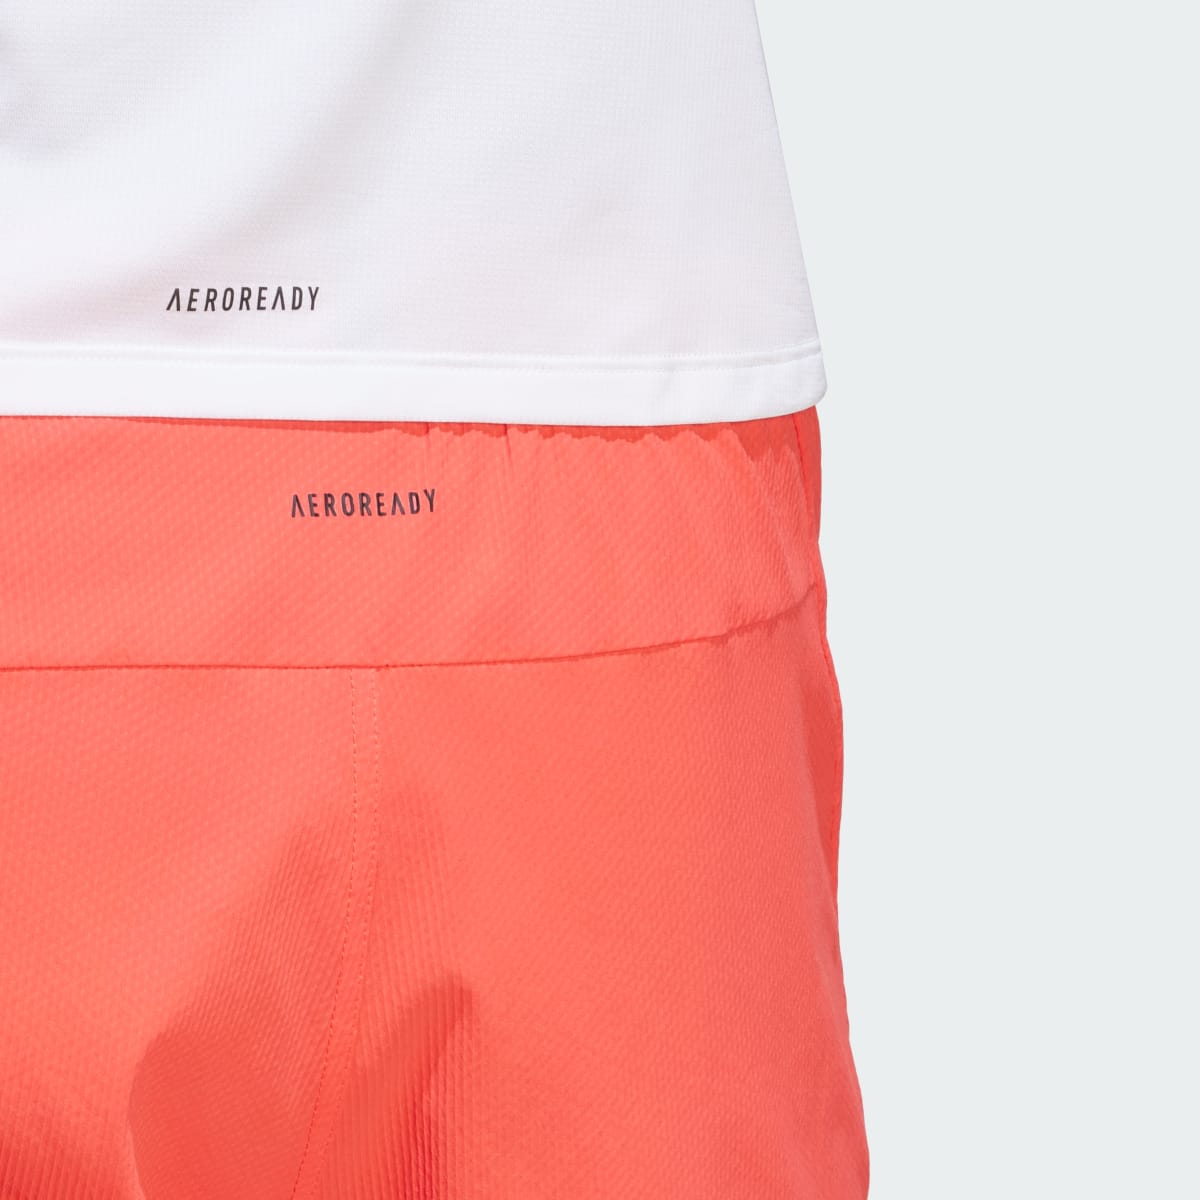 Adidas Power Workout Two-in-One Shorts. 6